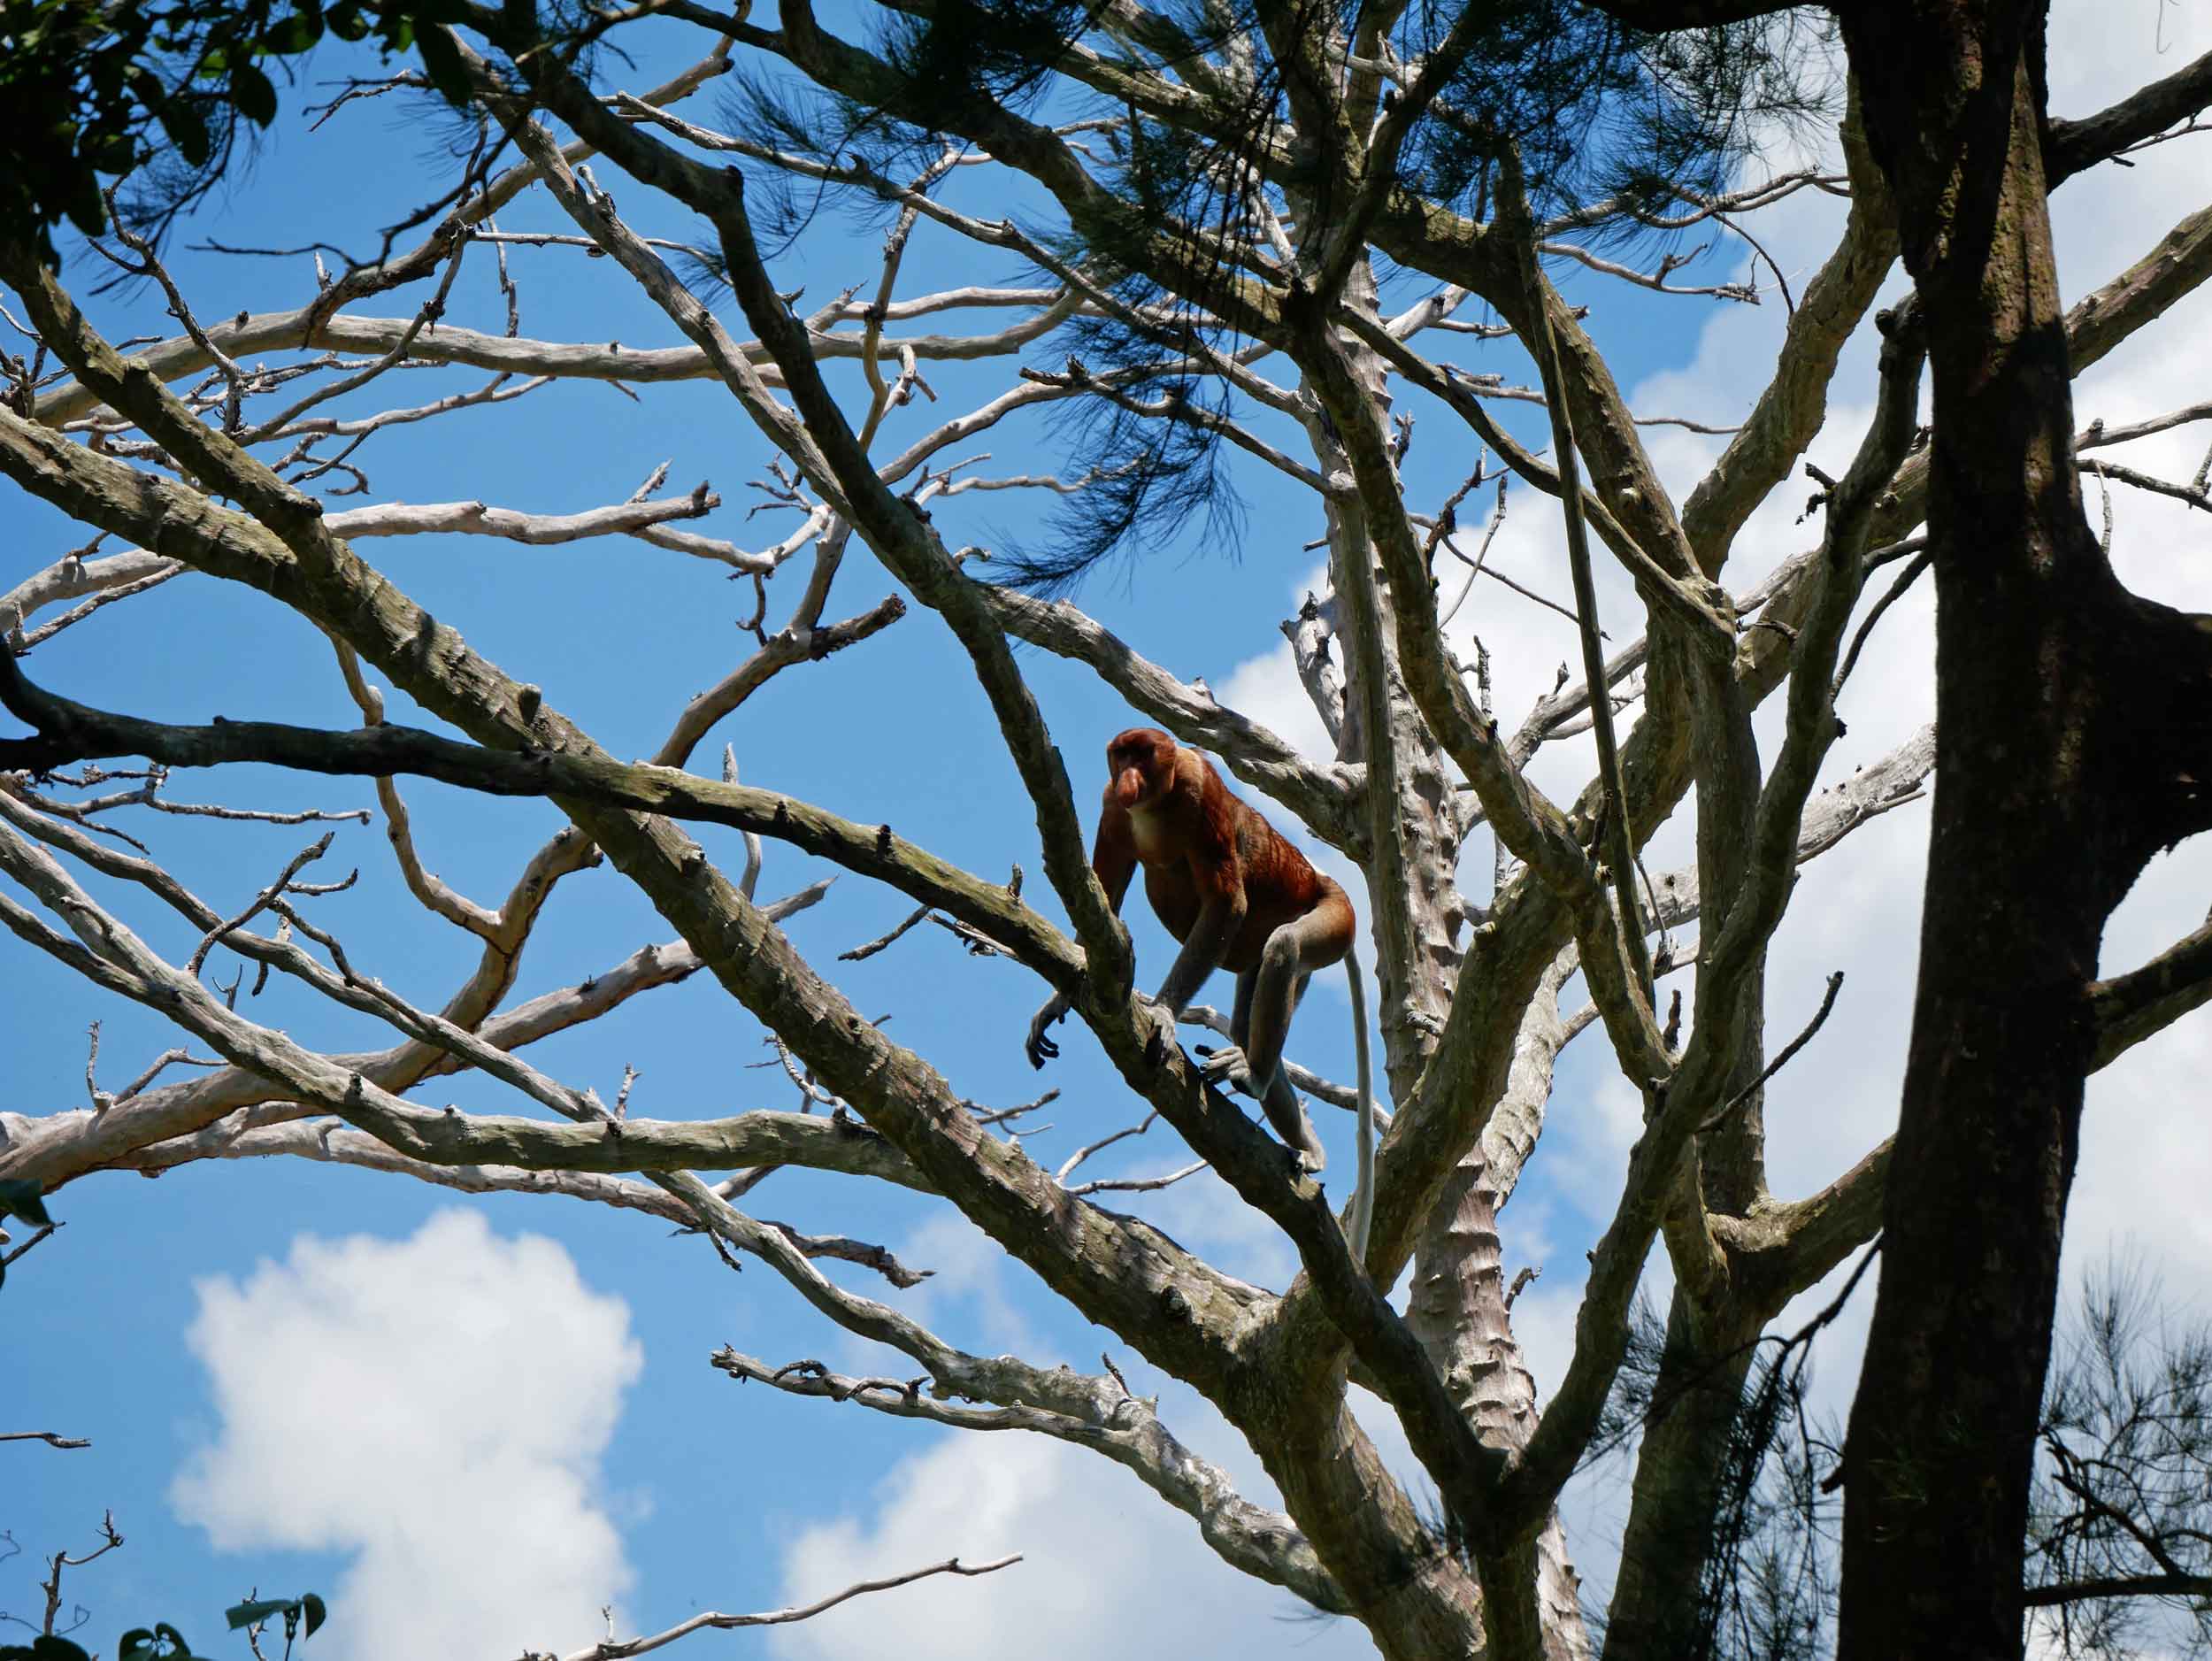  FINALLY! We spotted the rare proboscis monkeys, exclusive to Borneo and odd-looking with their pendulous noses.&nbsp; 